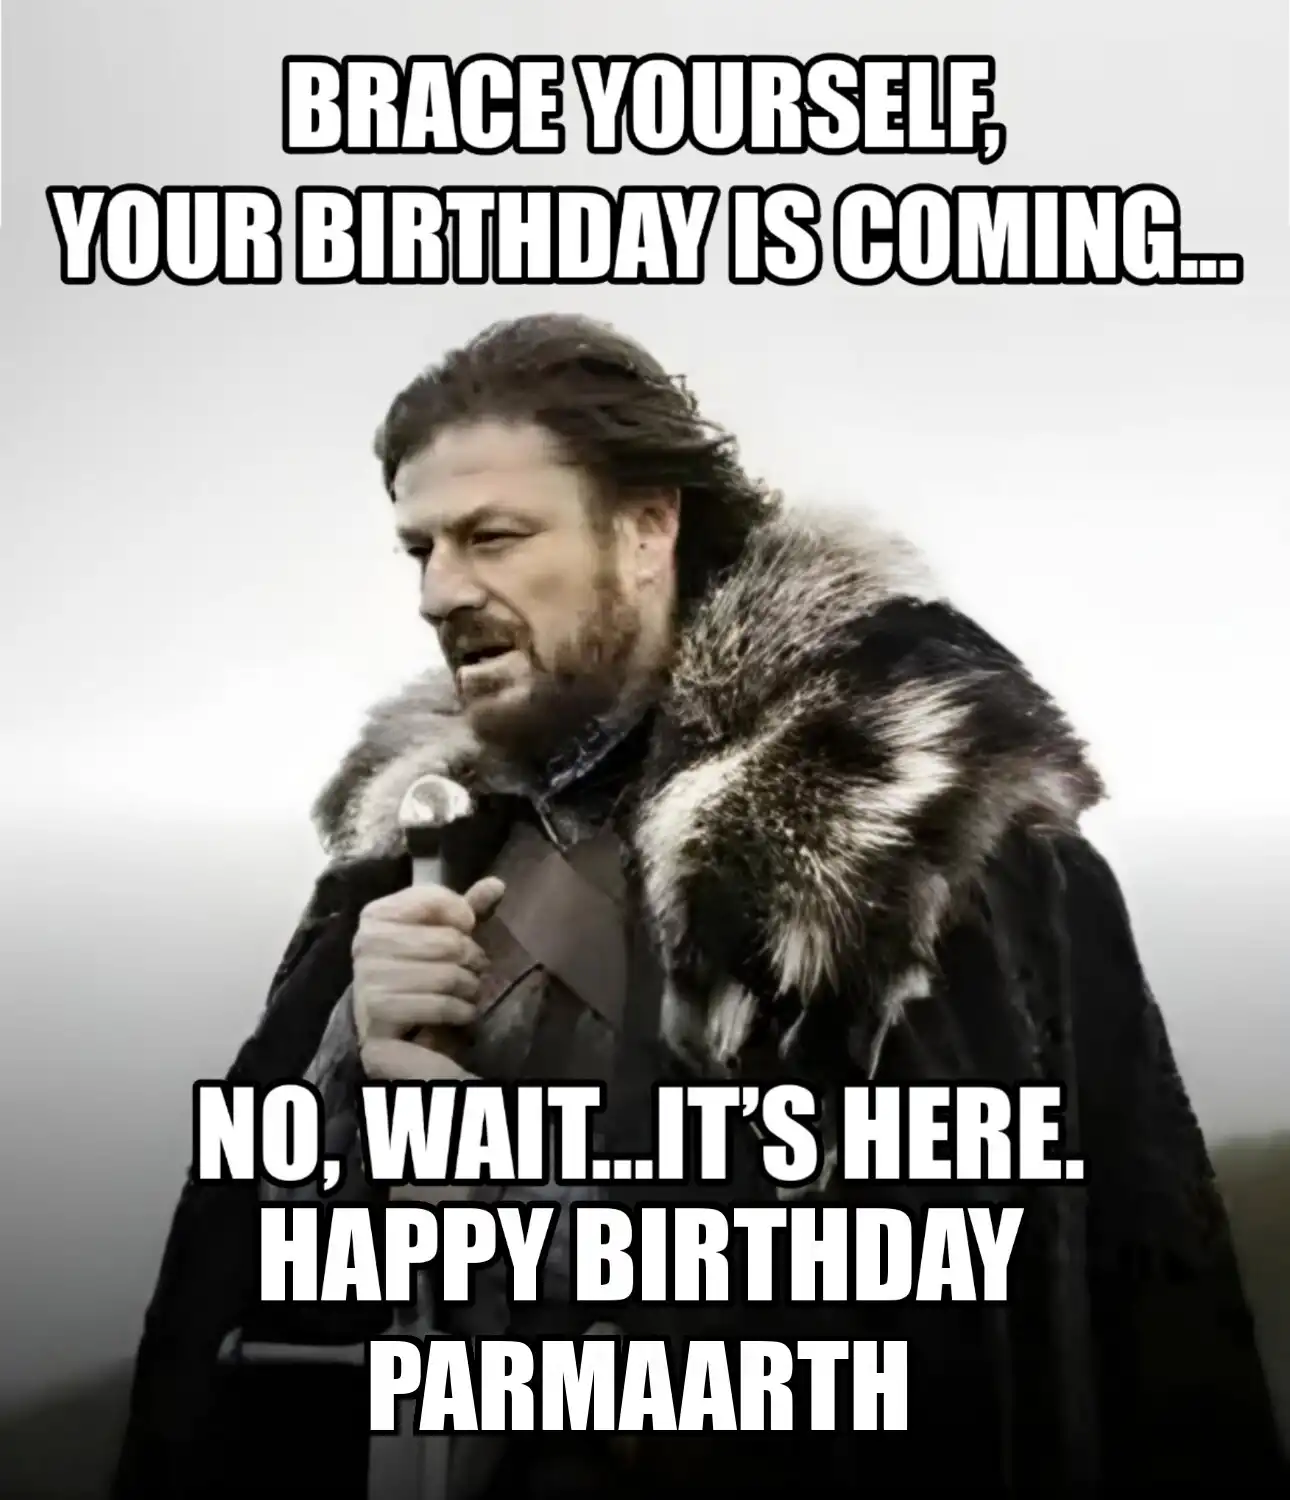 Happy Birthday Parmaarth Brace Yourself Your Birthday Is Coming Meme